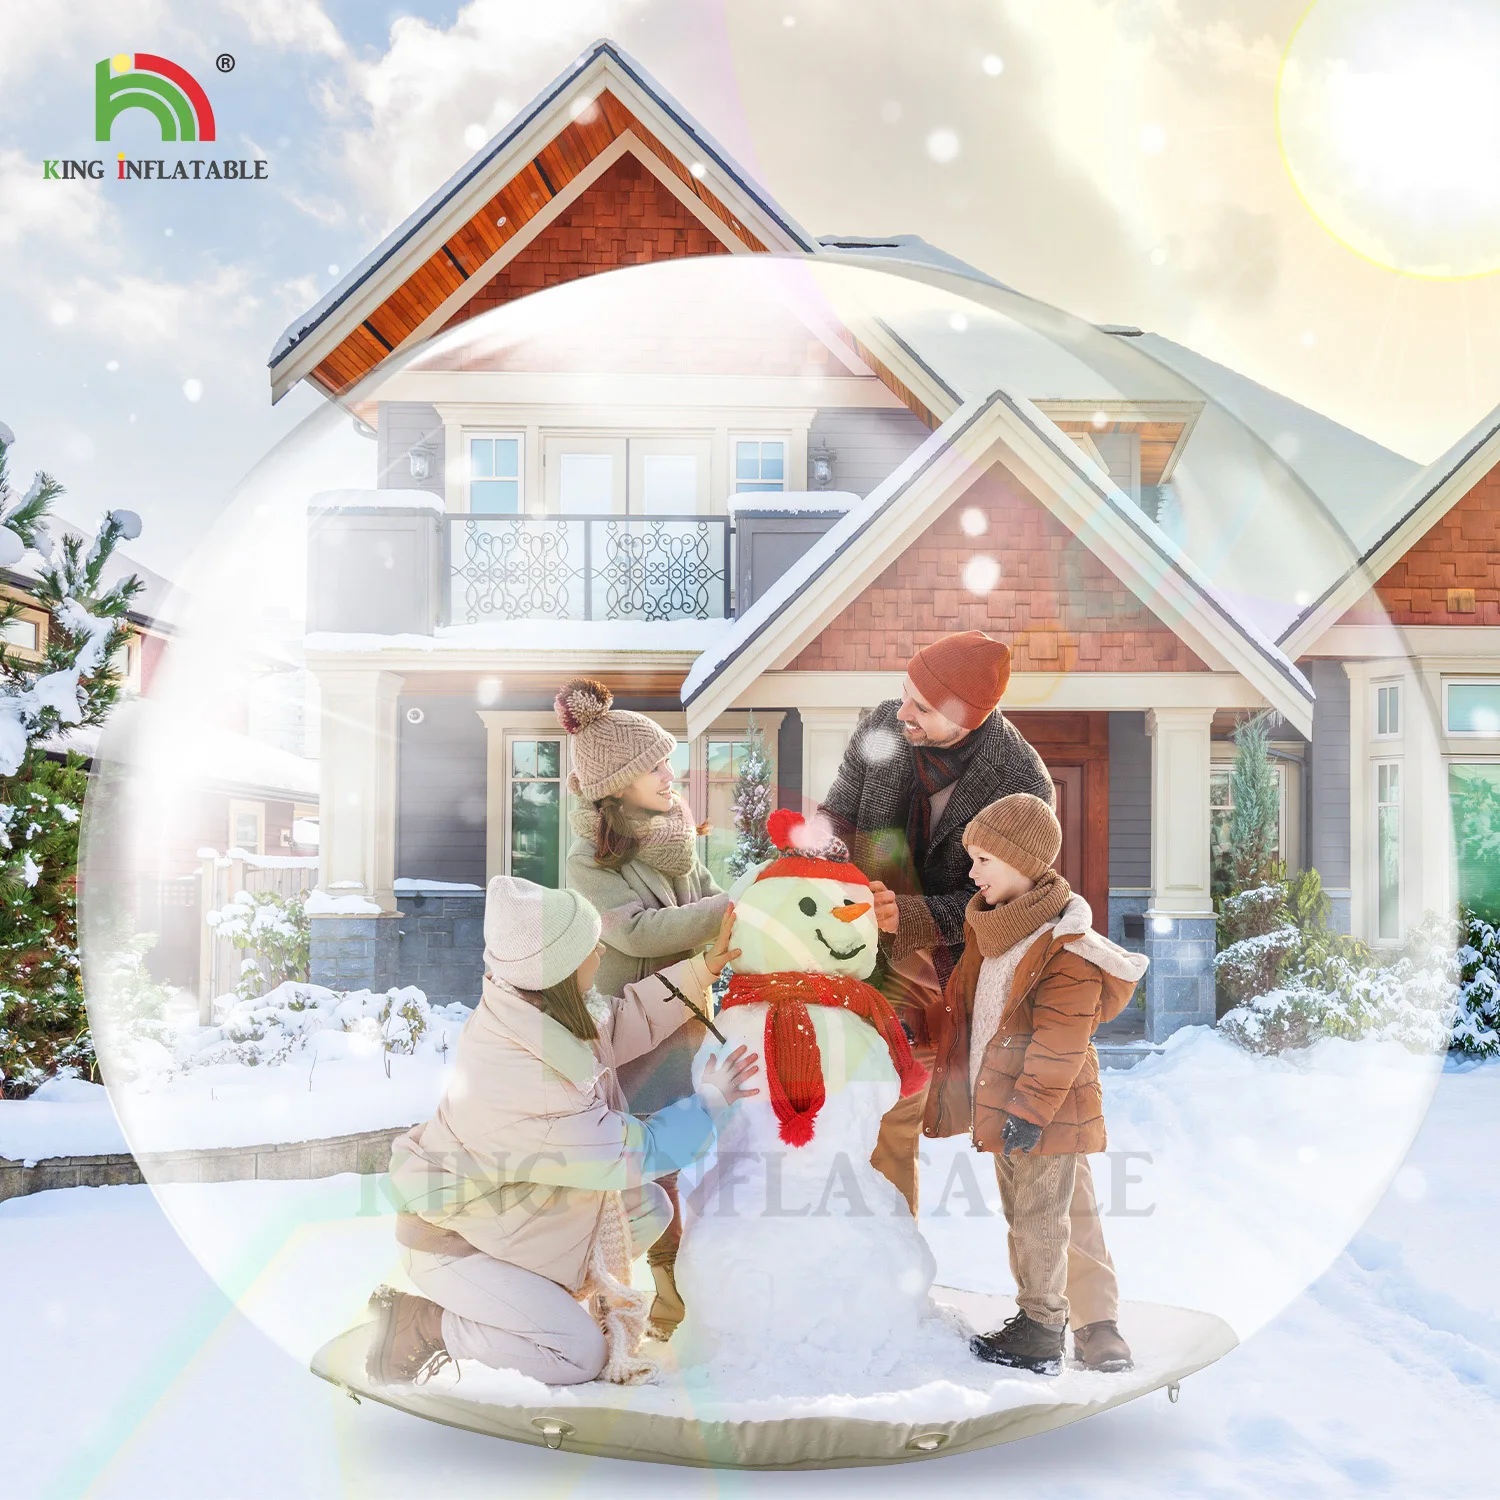 10ft/3m PVC Transparent Bubble Tent Giant Inflatable Snowball Christmas Snow Globe Dome Xmas Outdoor Decoration With Blower hd 4k 8mp ahd camera cctv video surveillance camera outdoor waterproof bullet analog ir night vision metal dome security cameras